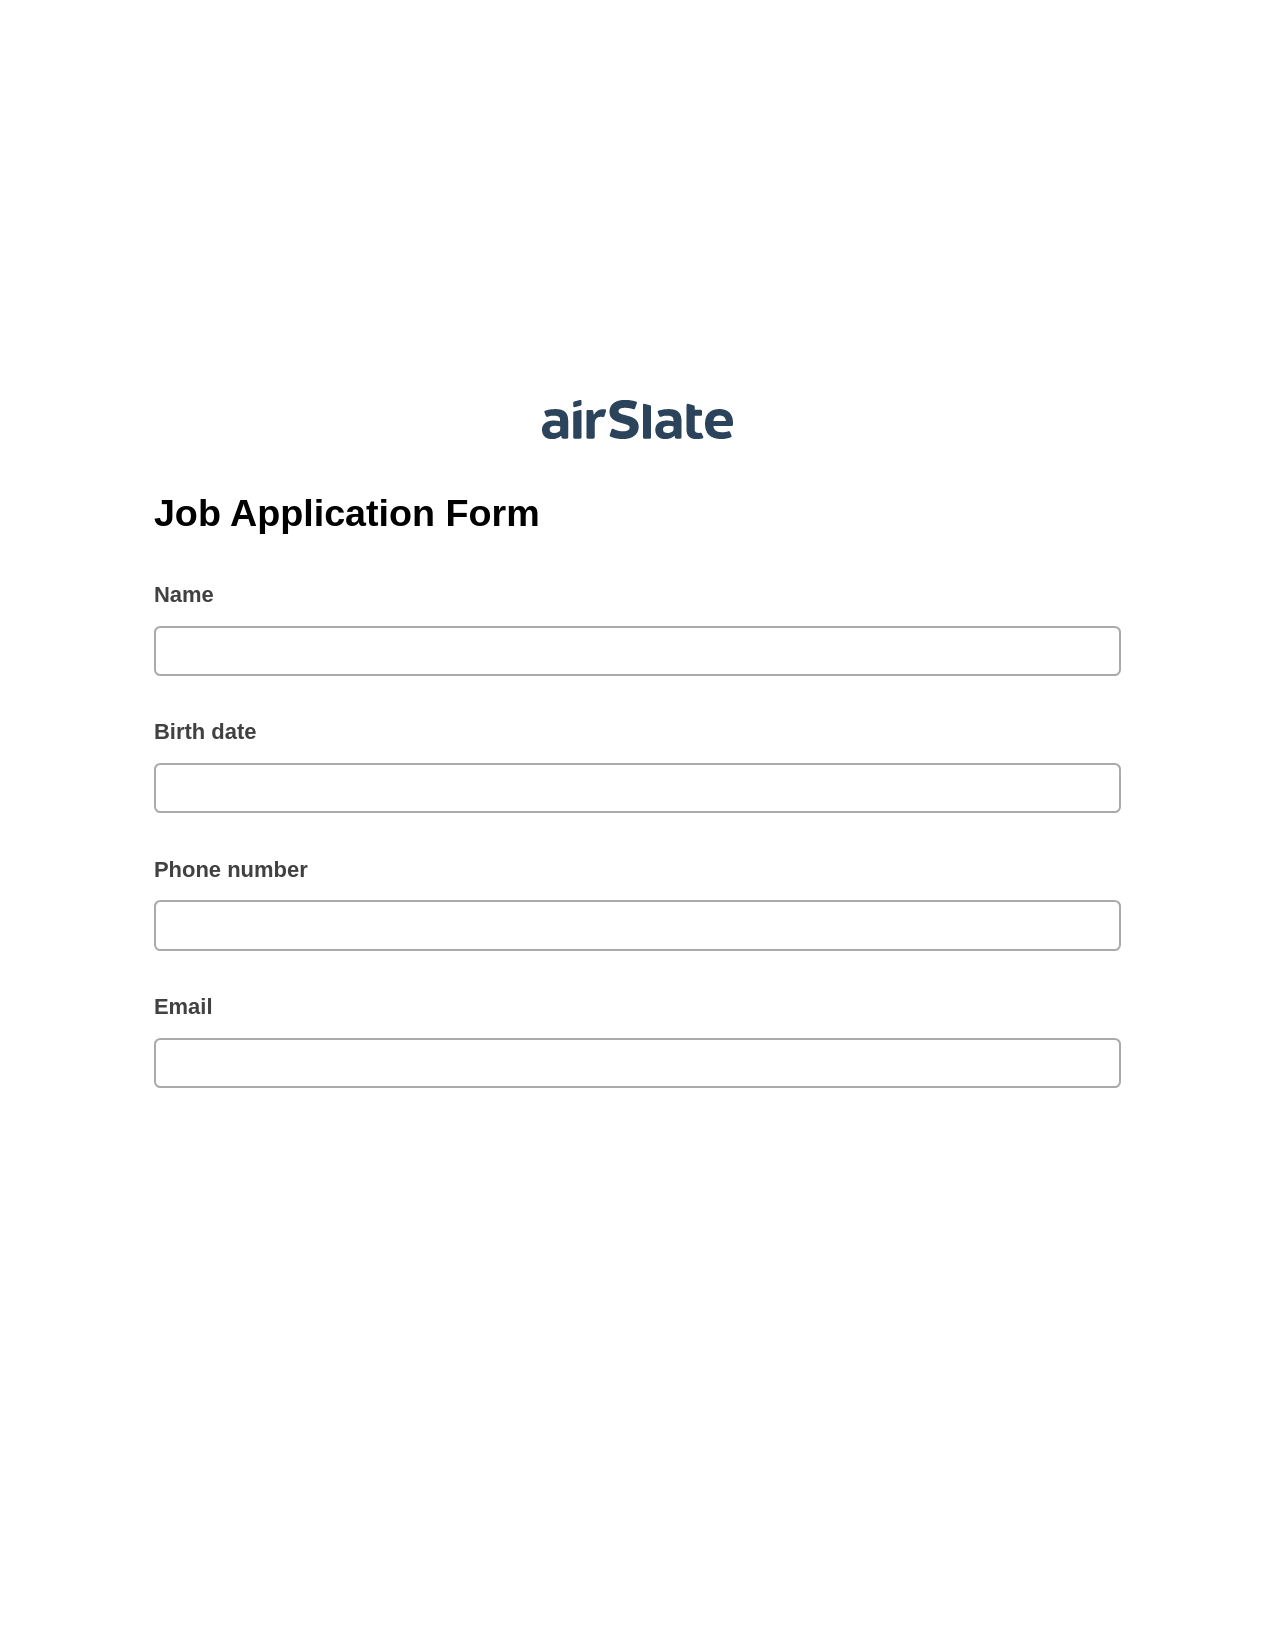 Job Application Form Pre-fill Dropdown from Airtable, Create MS Dynamics 365 Records Bot, Post-finish Document Bot